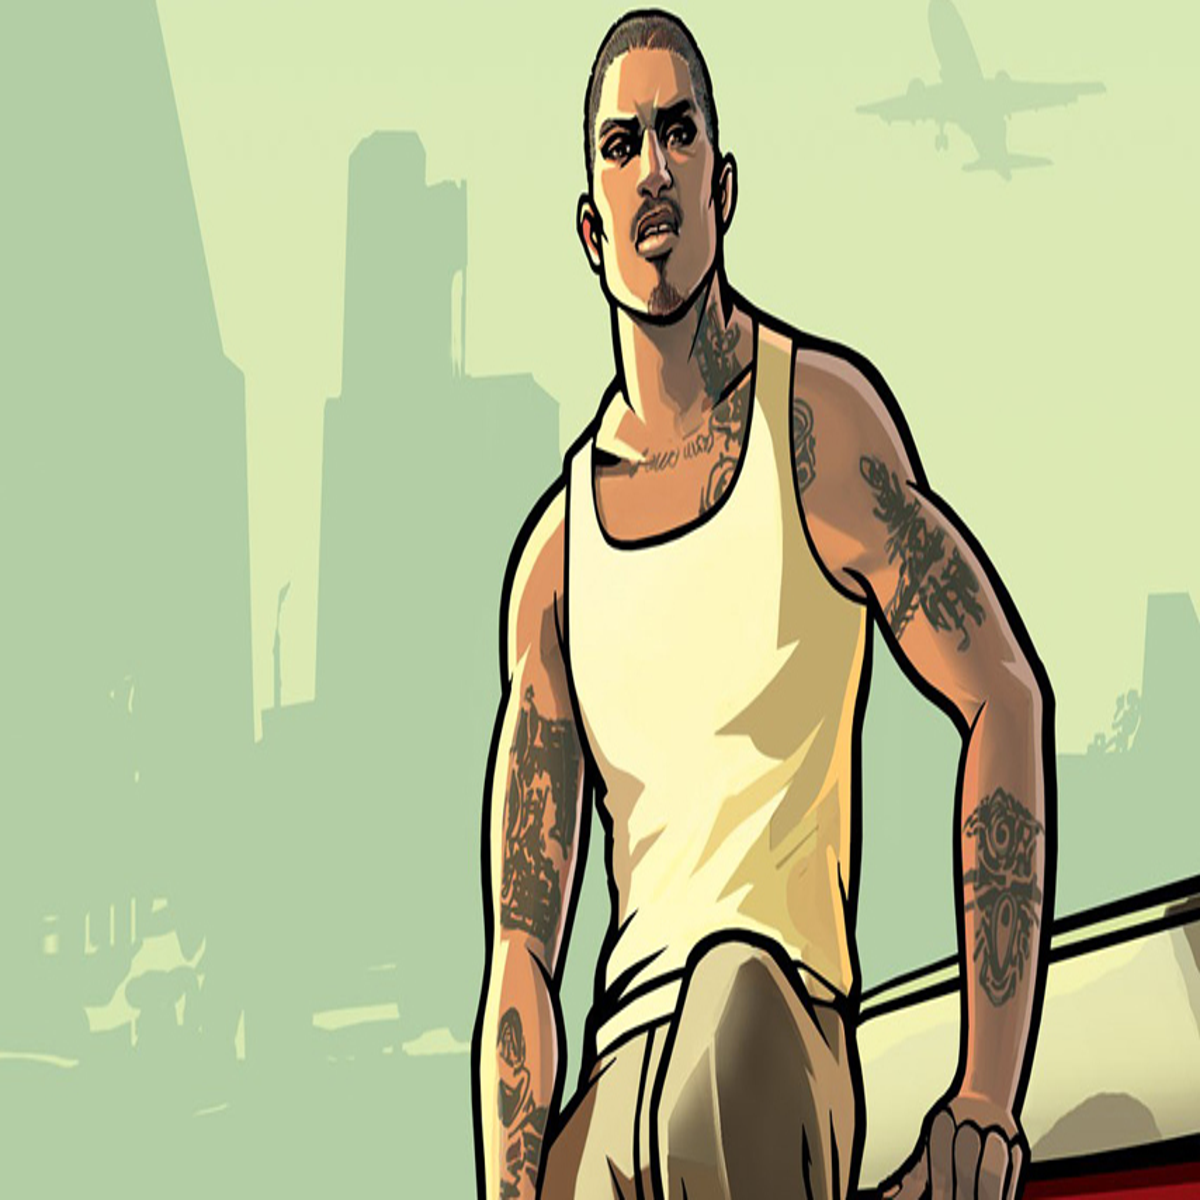 How to Play GTA San Andreas with XBOX 360 or PS2 Controller 